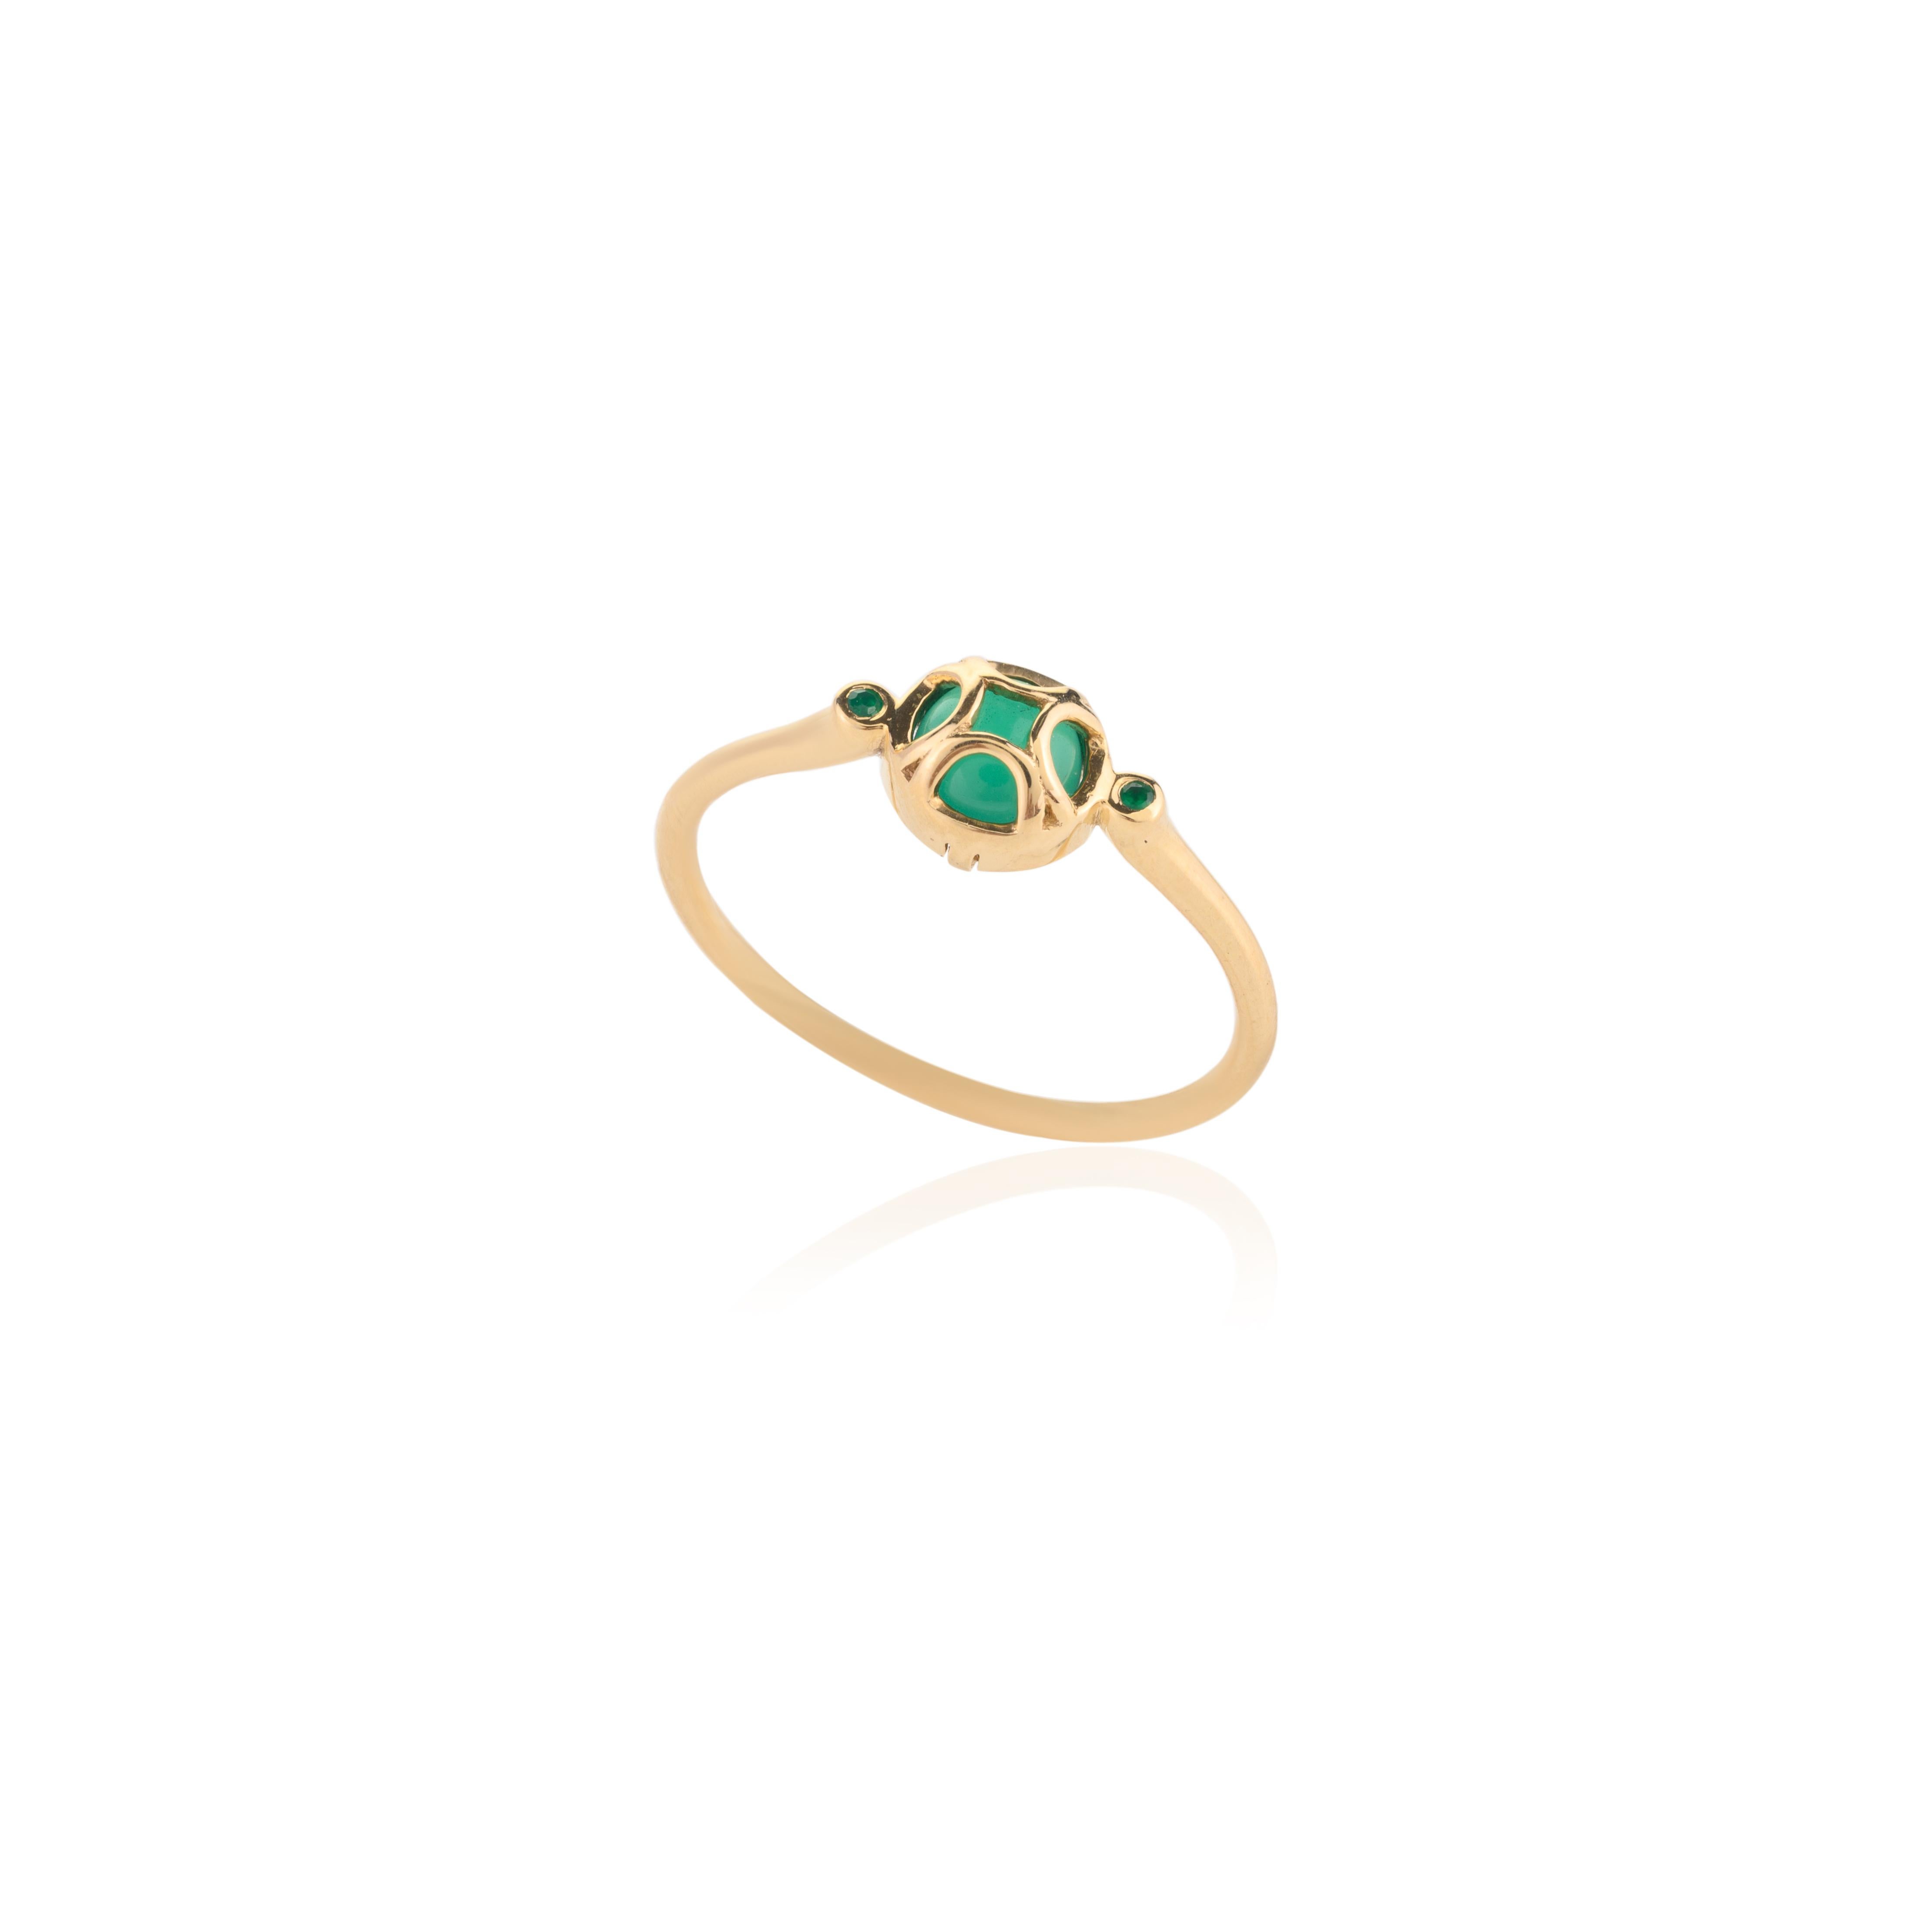 For Sale:  Modern 18k Solid Yellow Gold Green Onyx Minimalist Everyday Ring for Her 6